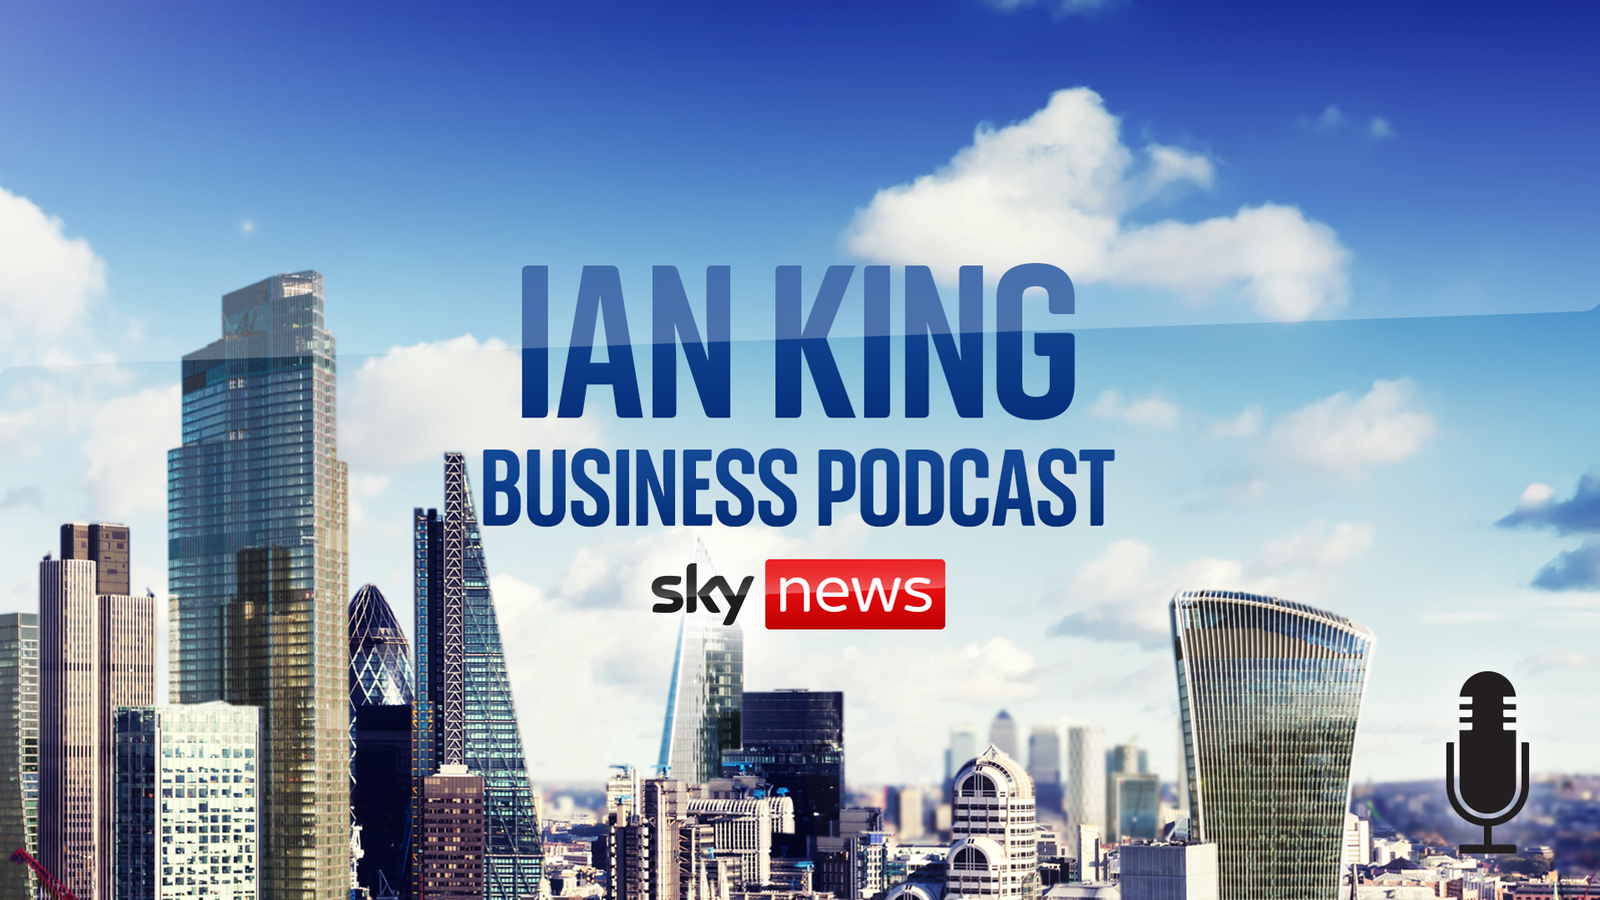 Ian King Business Podcast: Apple, rates of interest and pensions